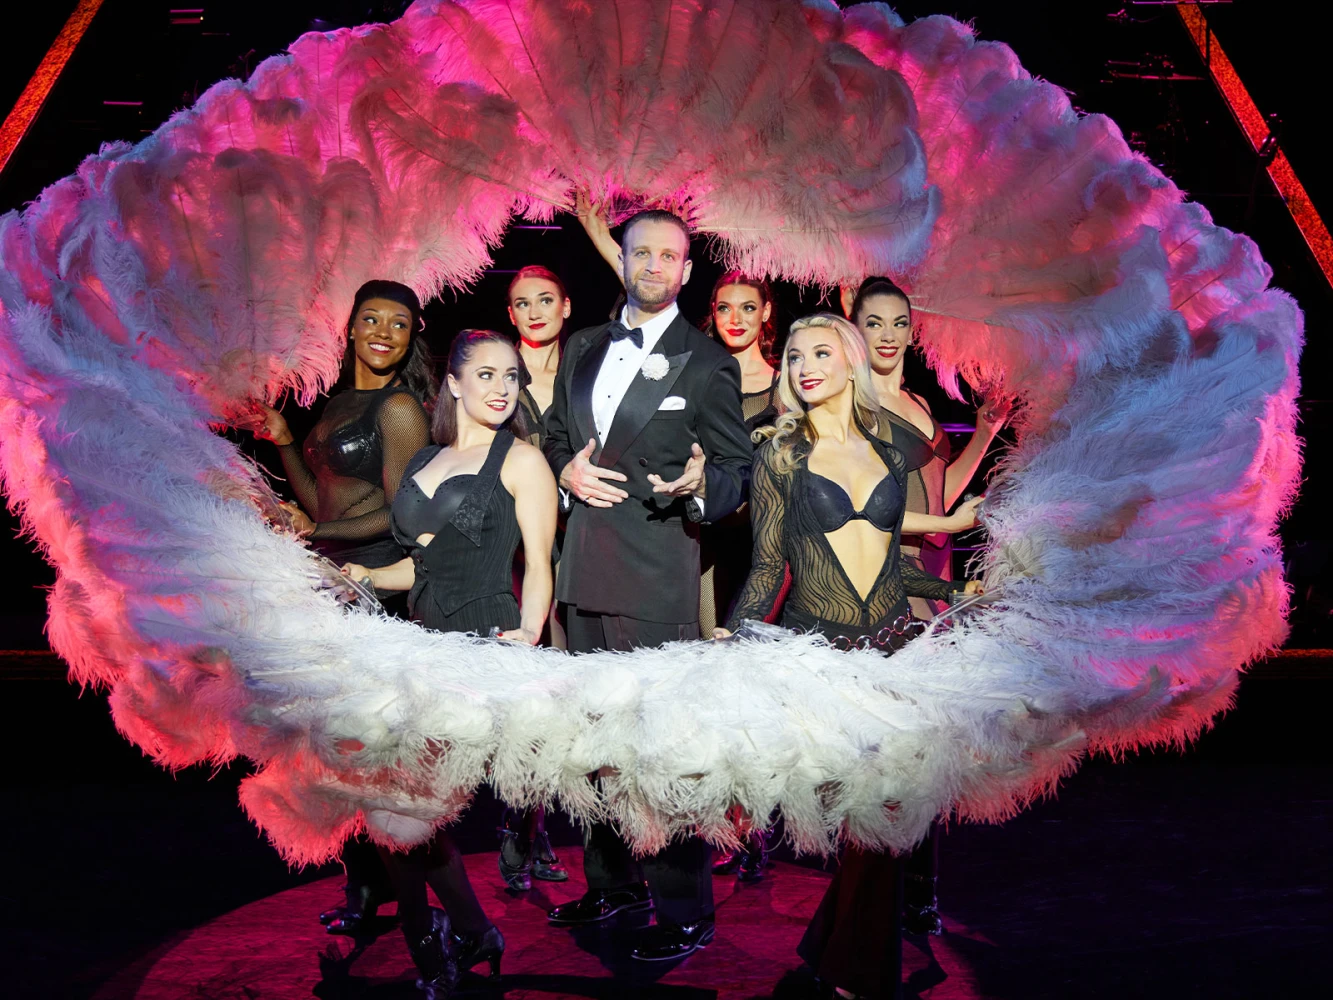 Chicago the Musical at the State Theatre New Jersey: What to expect - 3